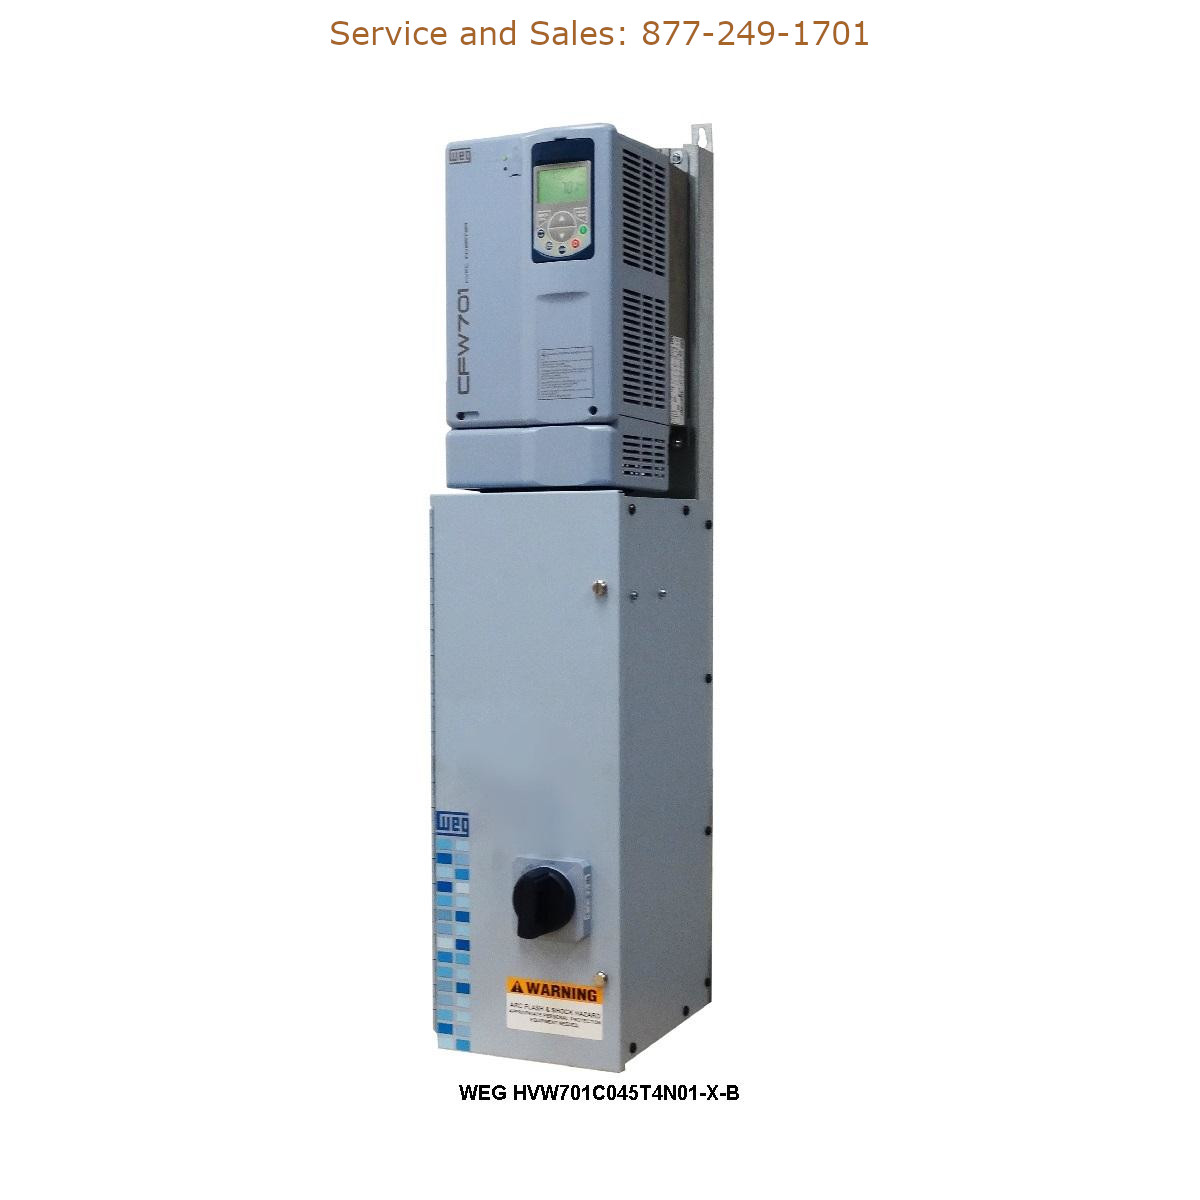 WEG HVW701C045T4N01-X-B WEG Model Number HVW701C045T4N01-X-B WEG Drives, Variable Speed Drives Repair Service, Troubleshooting, Replacement Parts https://gesrepair.com/wp-content/uploads/2022/WEG/WEG_HVW701C045T4N01-X-B_Drives_Variable_Speed_Drives.jpg